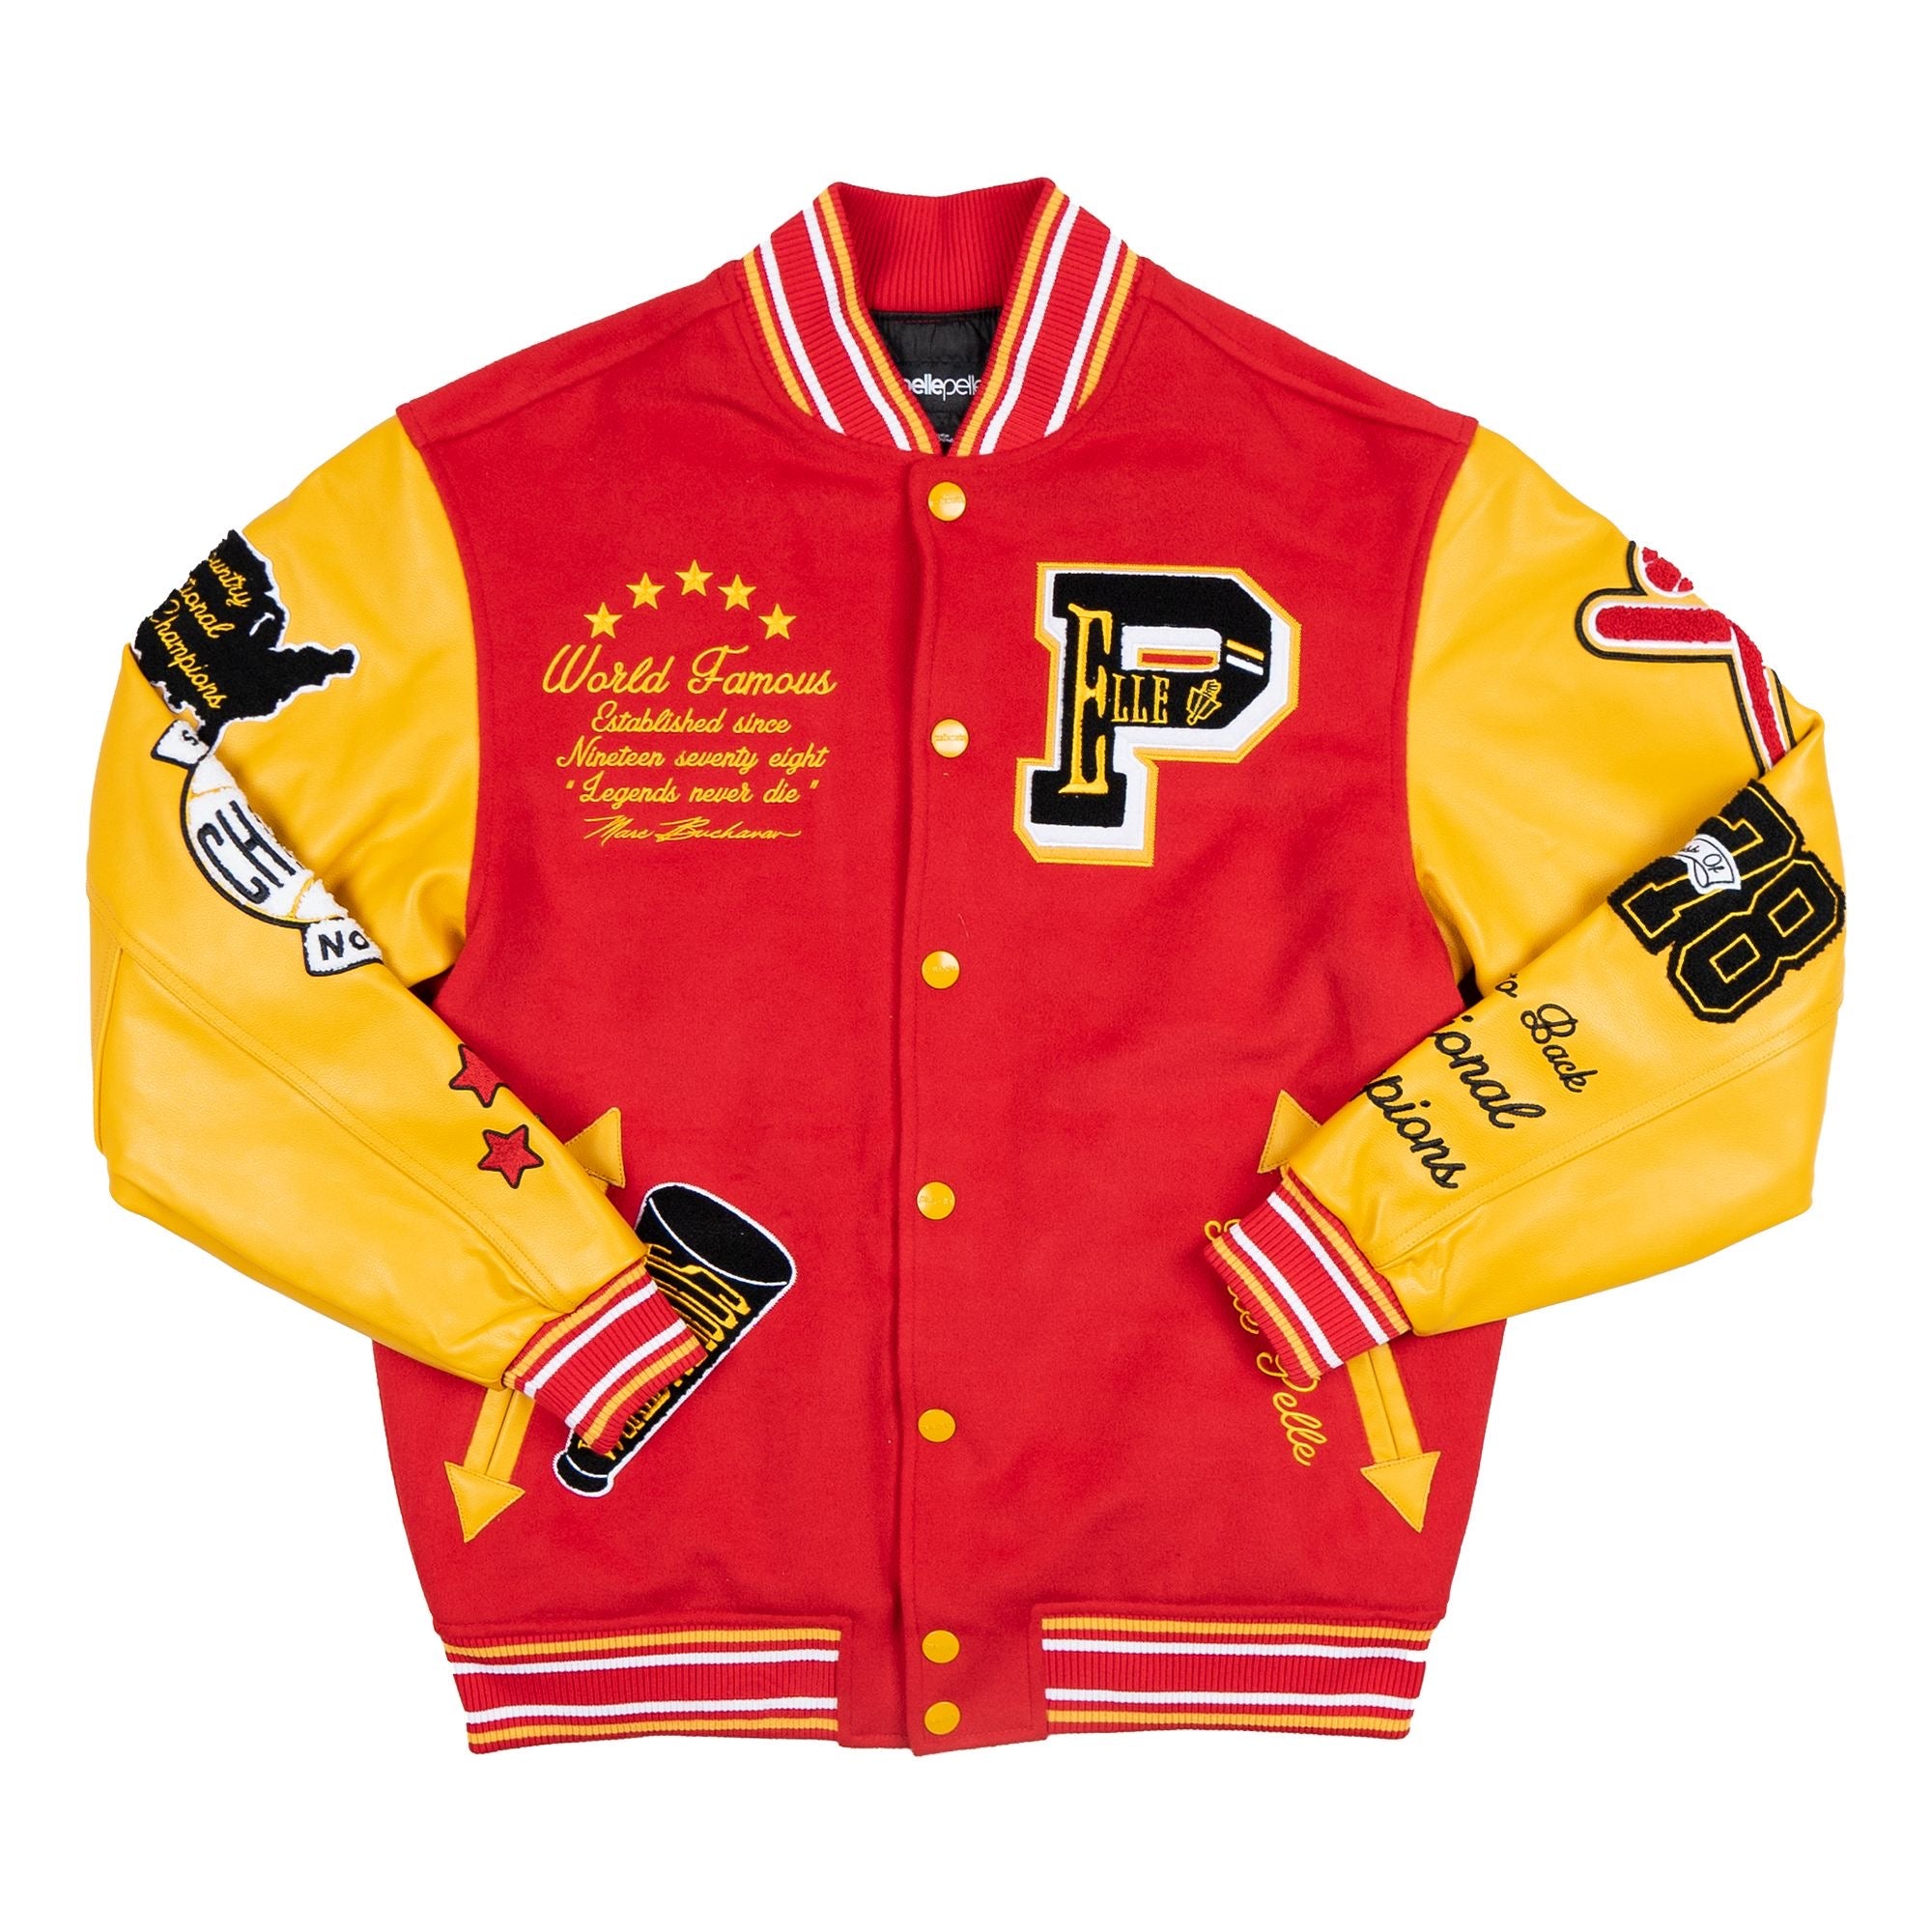 Pelle Pelle World Famous Red Wool and Leather Varsity Jacket